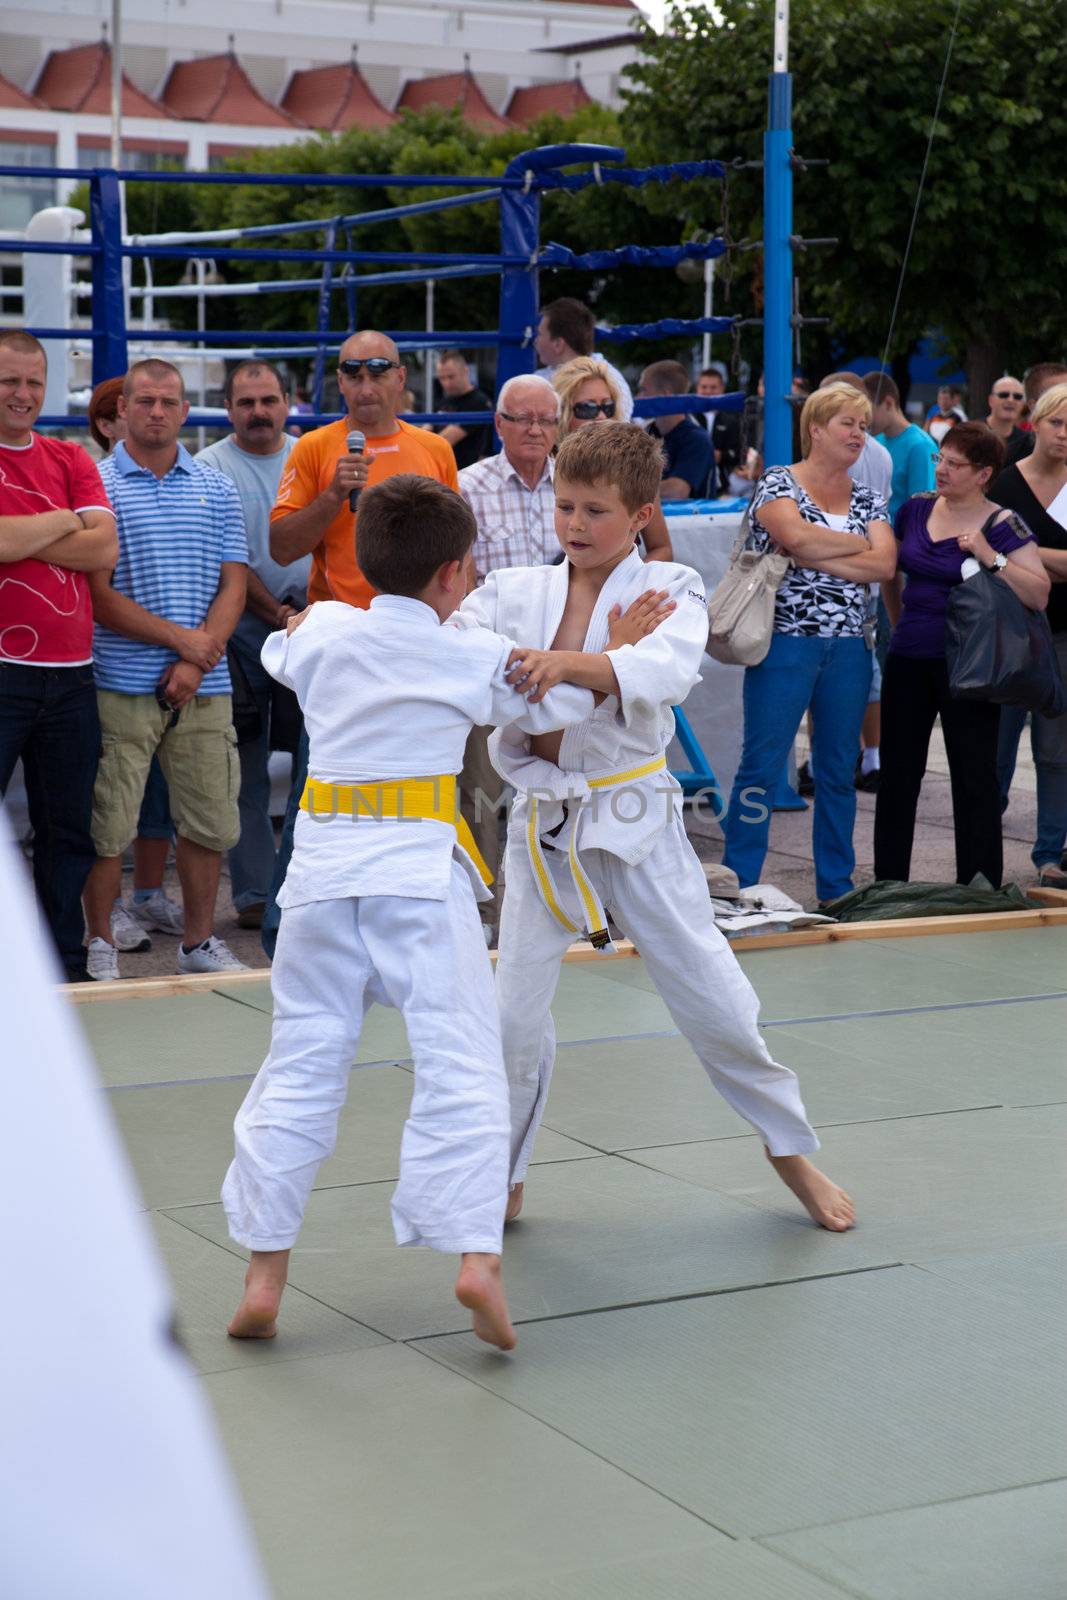 SOPOT, POLAND - JULY 16: The karate kids fighting for the competition on July 16, 2011 in Sopot, Poland by remik44992